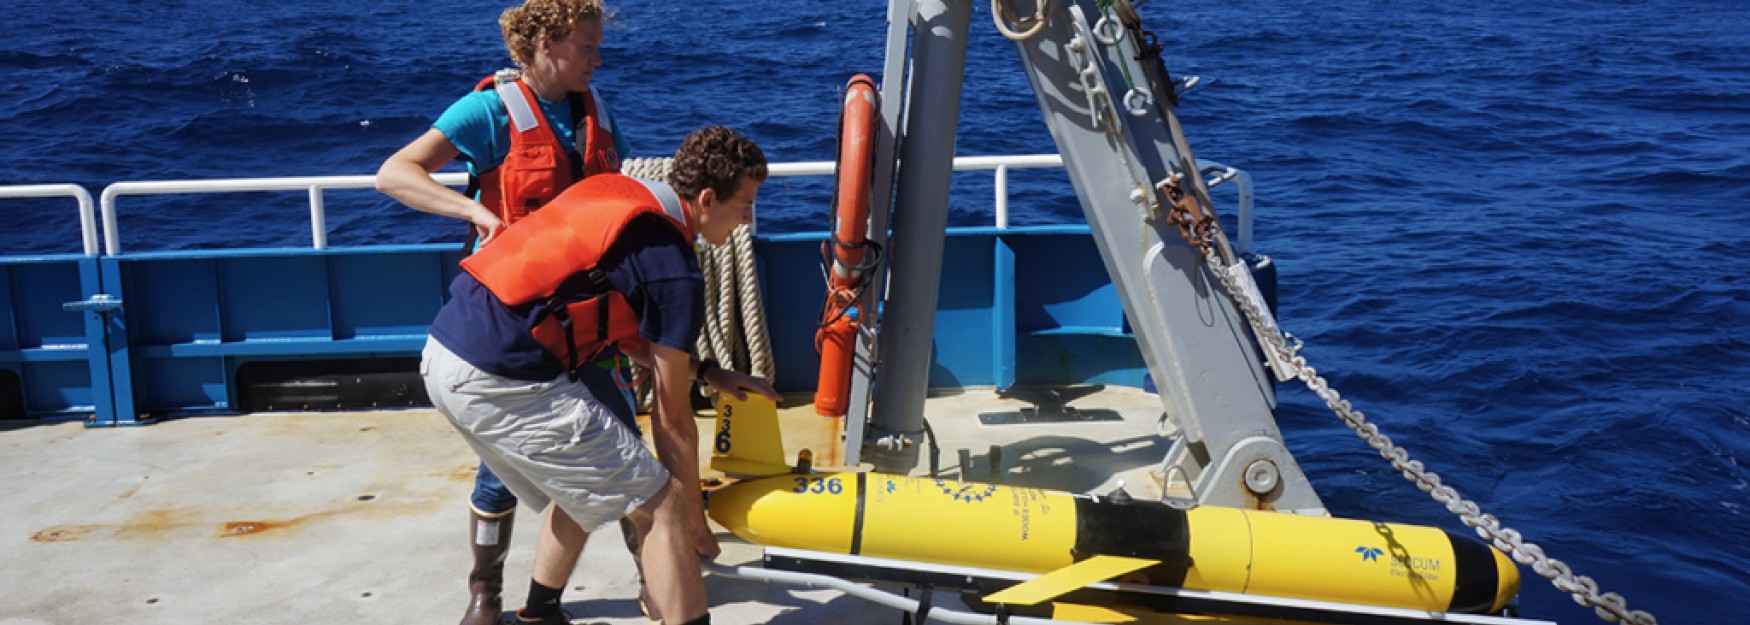 Andy Robinson deploys a research device on a research vessel in the ocean